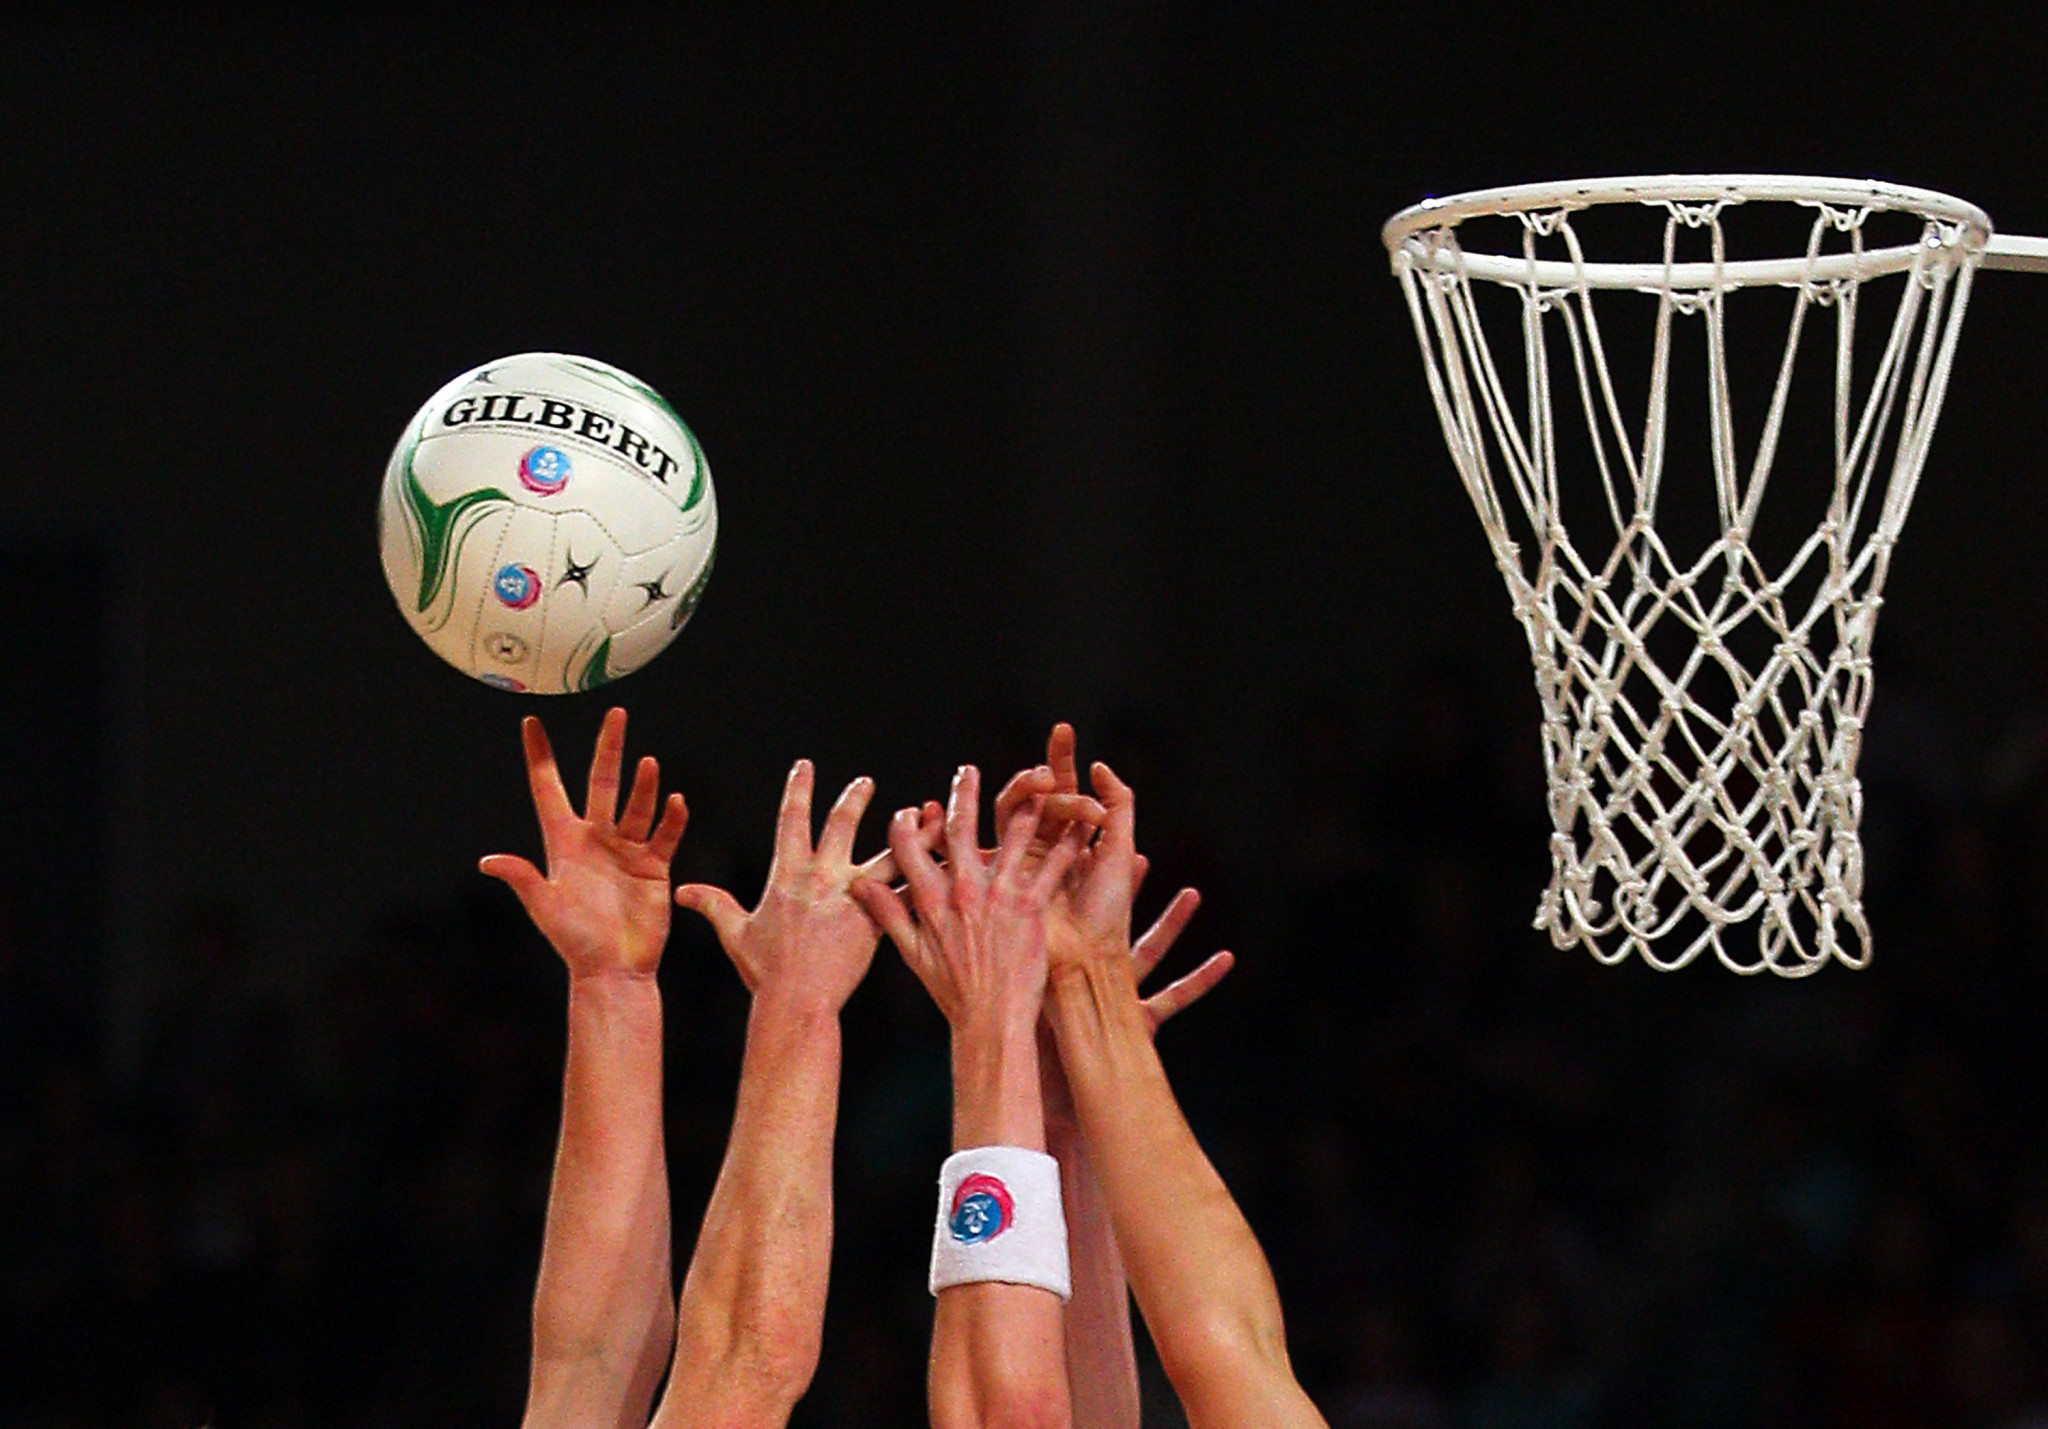 The Netball World Cup is due to take place later this year in Cape Town, South Africa ©Getty Images